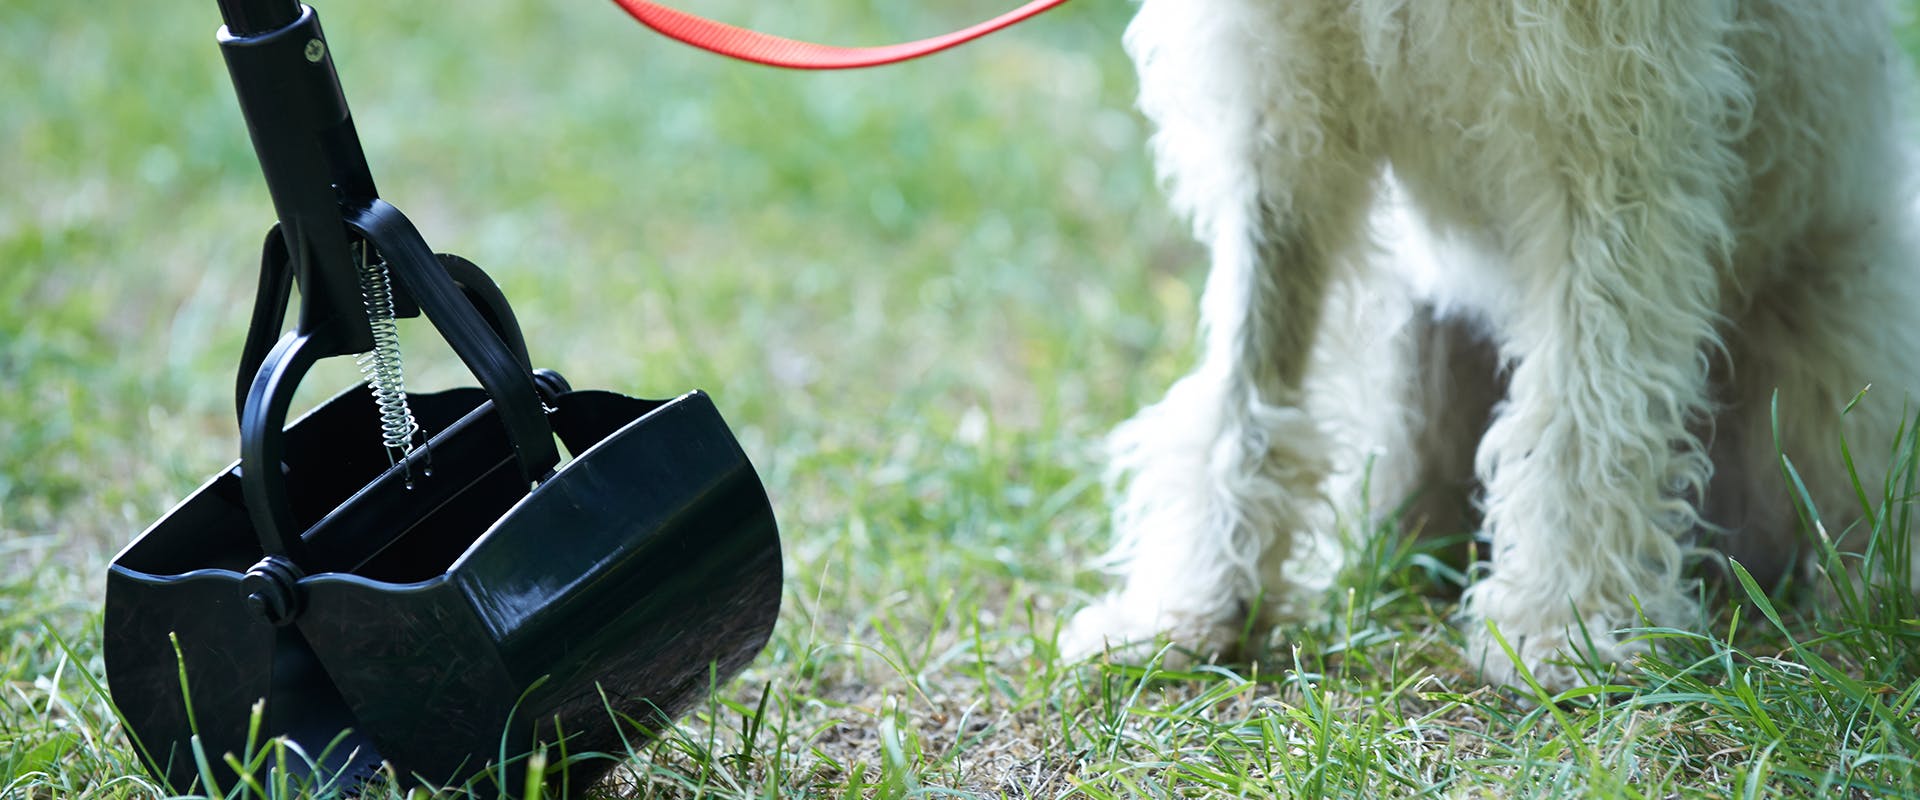 A person using a dog pooper scooper, a small white dog standing to the side